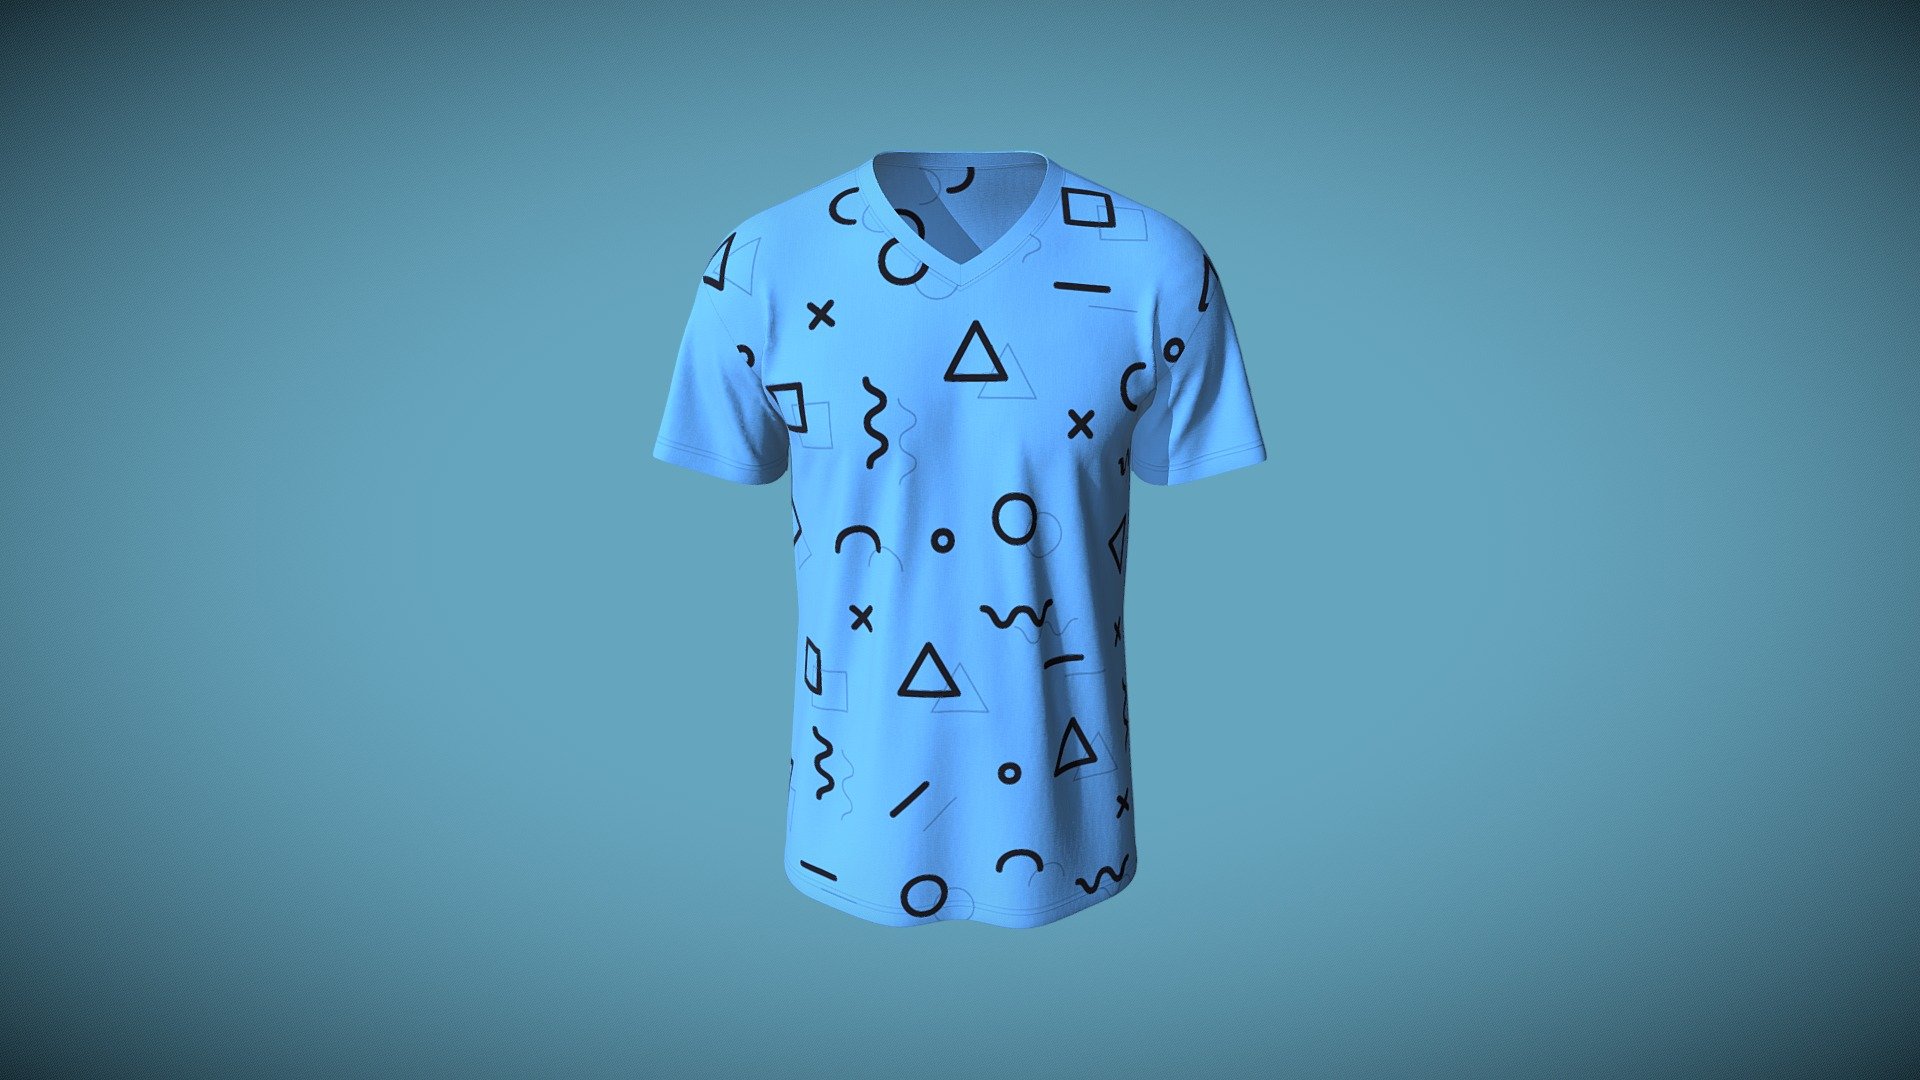 Cloth Title = V- Neck Set In Sleeve Tee Design Blue 

SKU = DG100048 

Category = Men 

Product Type = Tee 

Cloth Length = Regular 

Body Fit = Regular Fit 

Occasion = Casual  

Sleeve Style = Set In Sleeve 


Our Services:

3D Apparel Design.

OBJ,FBX,GLTF Making with High/Low Poly.

Fabric Digitalization.

Mockup making.

3D Teck Pack.

Pattern Making.

2D Illustration.

Cloth Animation and 360 Spin Video.


We designed all the types of cloth specially focused on product visualization, e-commerce, fitting, and production. 

We will design: 

T-shirts 

Polo shirts 

Hoodies 

Sweatshirt 

Jackets 

Shirts 

TankTops 

Trousers 

Bras 

Underwear 

Blazer 

Aprons 

Leggings 

and All Fashion items. 





Our goal is to make sure what we provide you, meets your demand 3d model